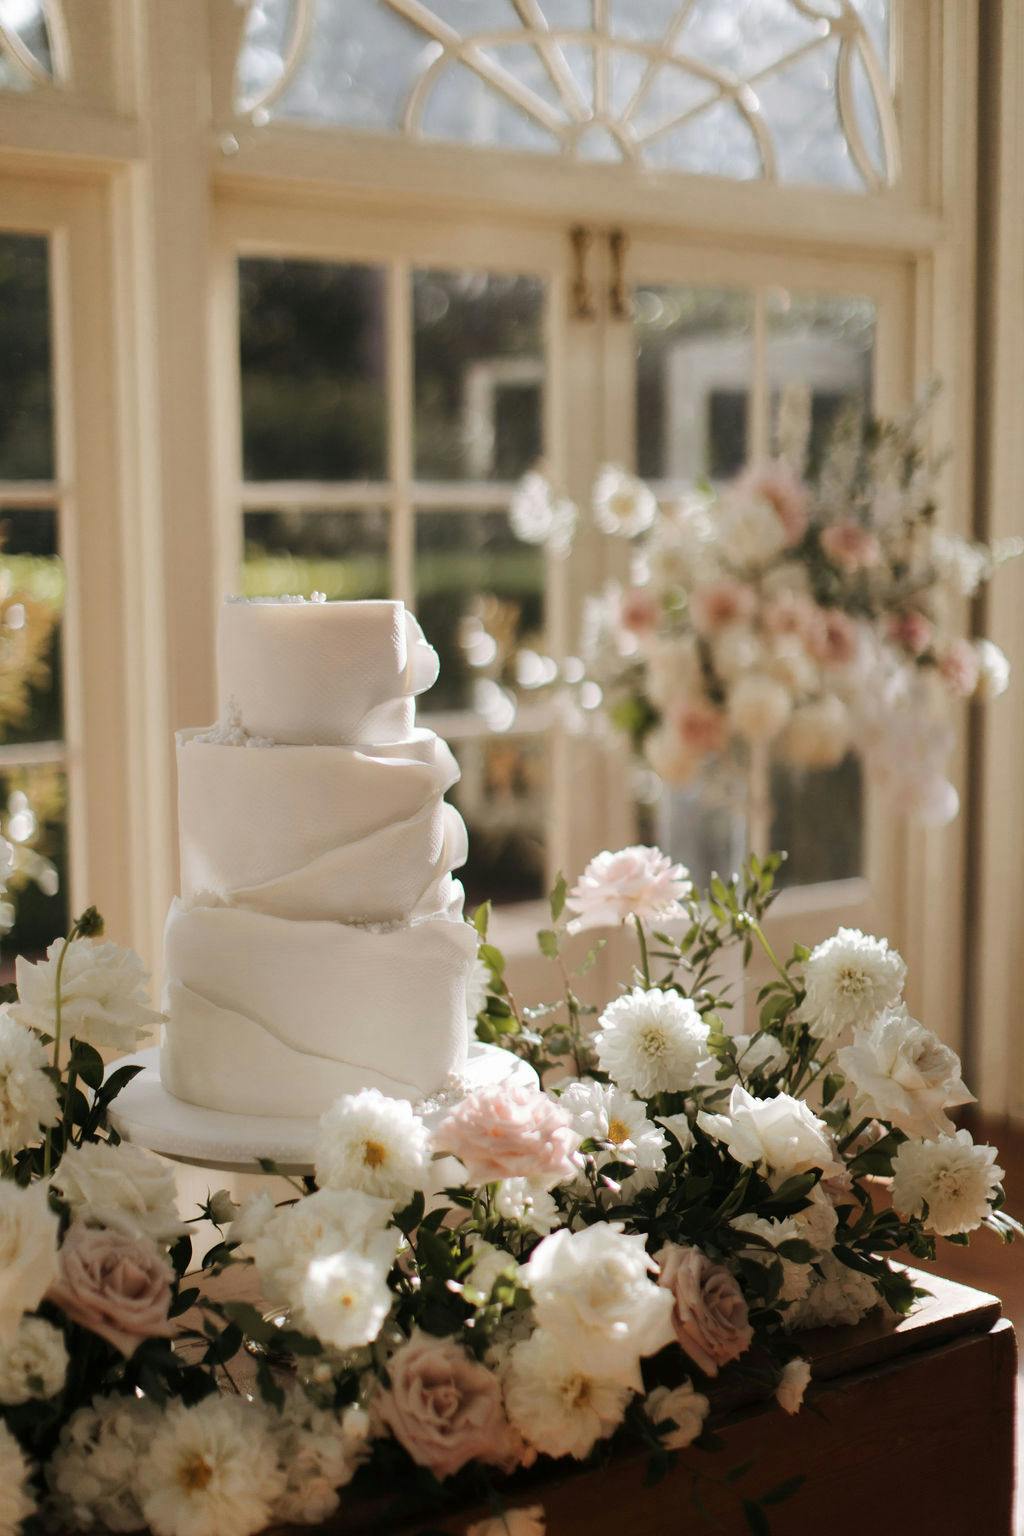 A white, three-tier wedding cake with a modern, asymmetrical design sits on a wooden table adorned with white and light pink flowers. Behind it, a large window with intricate panes allows soft sunlight to filter in, illuminating a floral arrangement in the background.